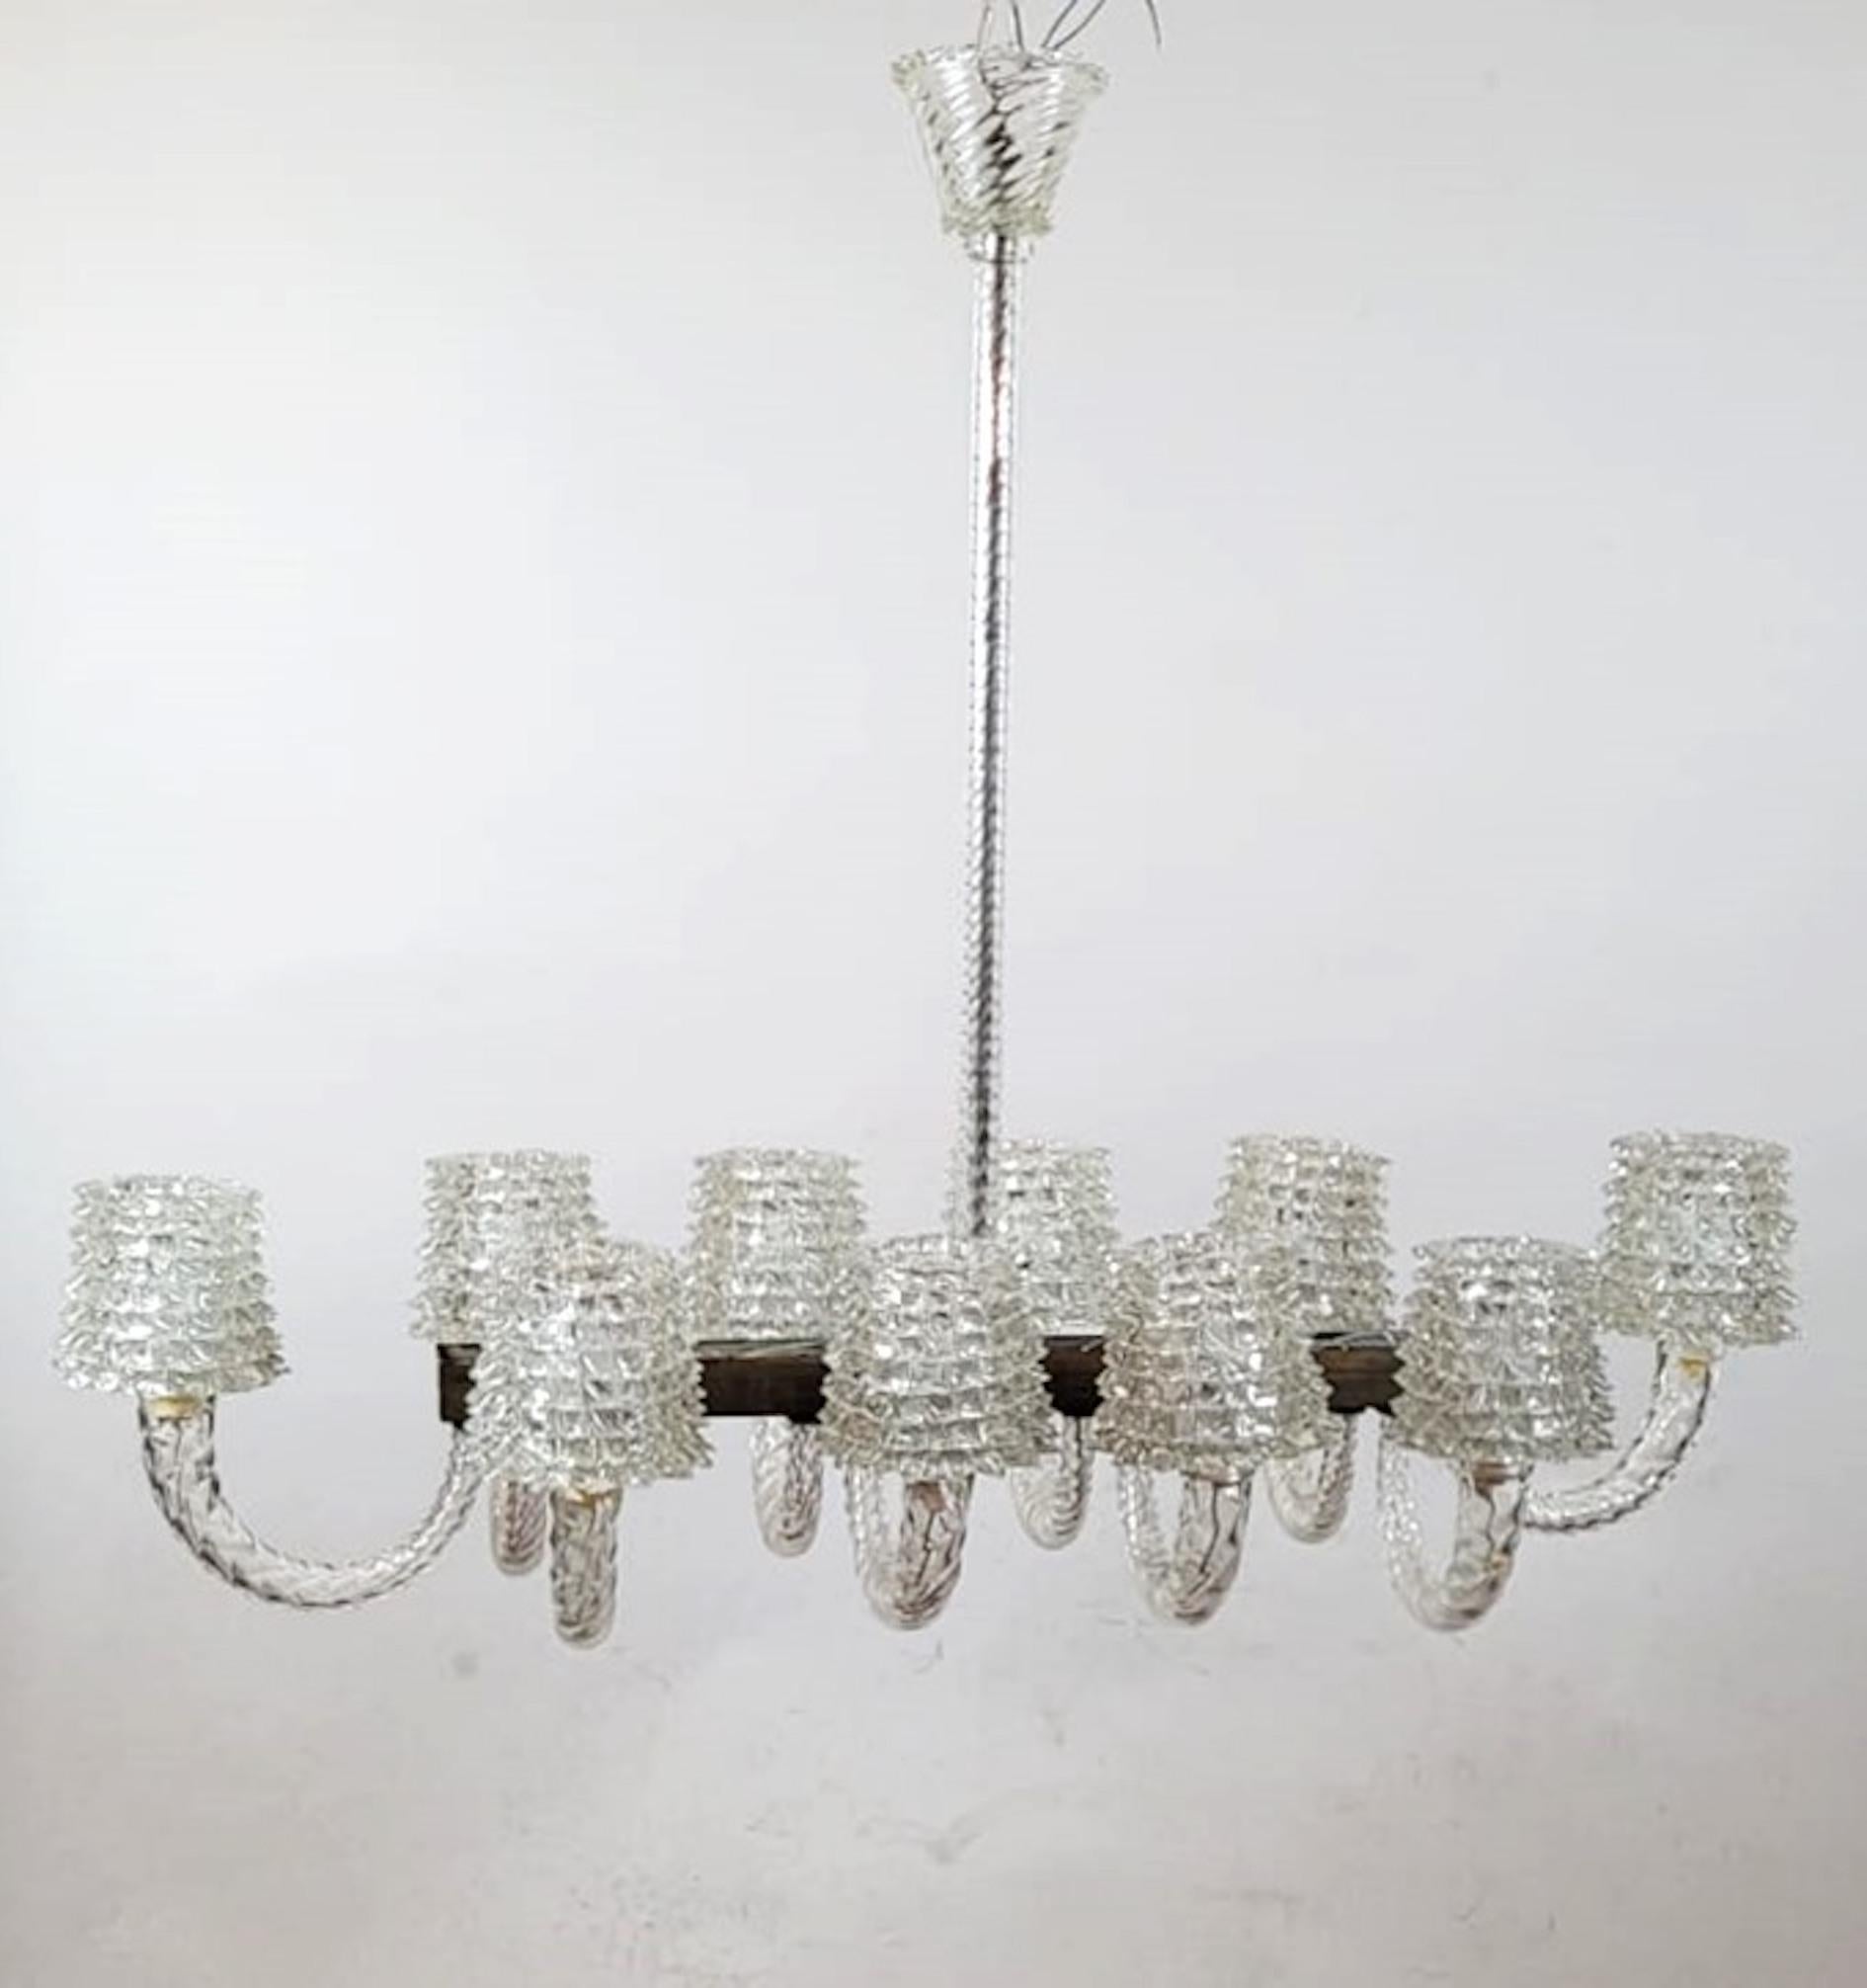 Murano Glass Large Barovier And Toso Chandelier - Murano - 10 Sconces For Sale